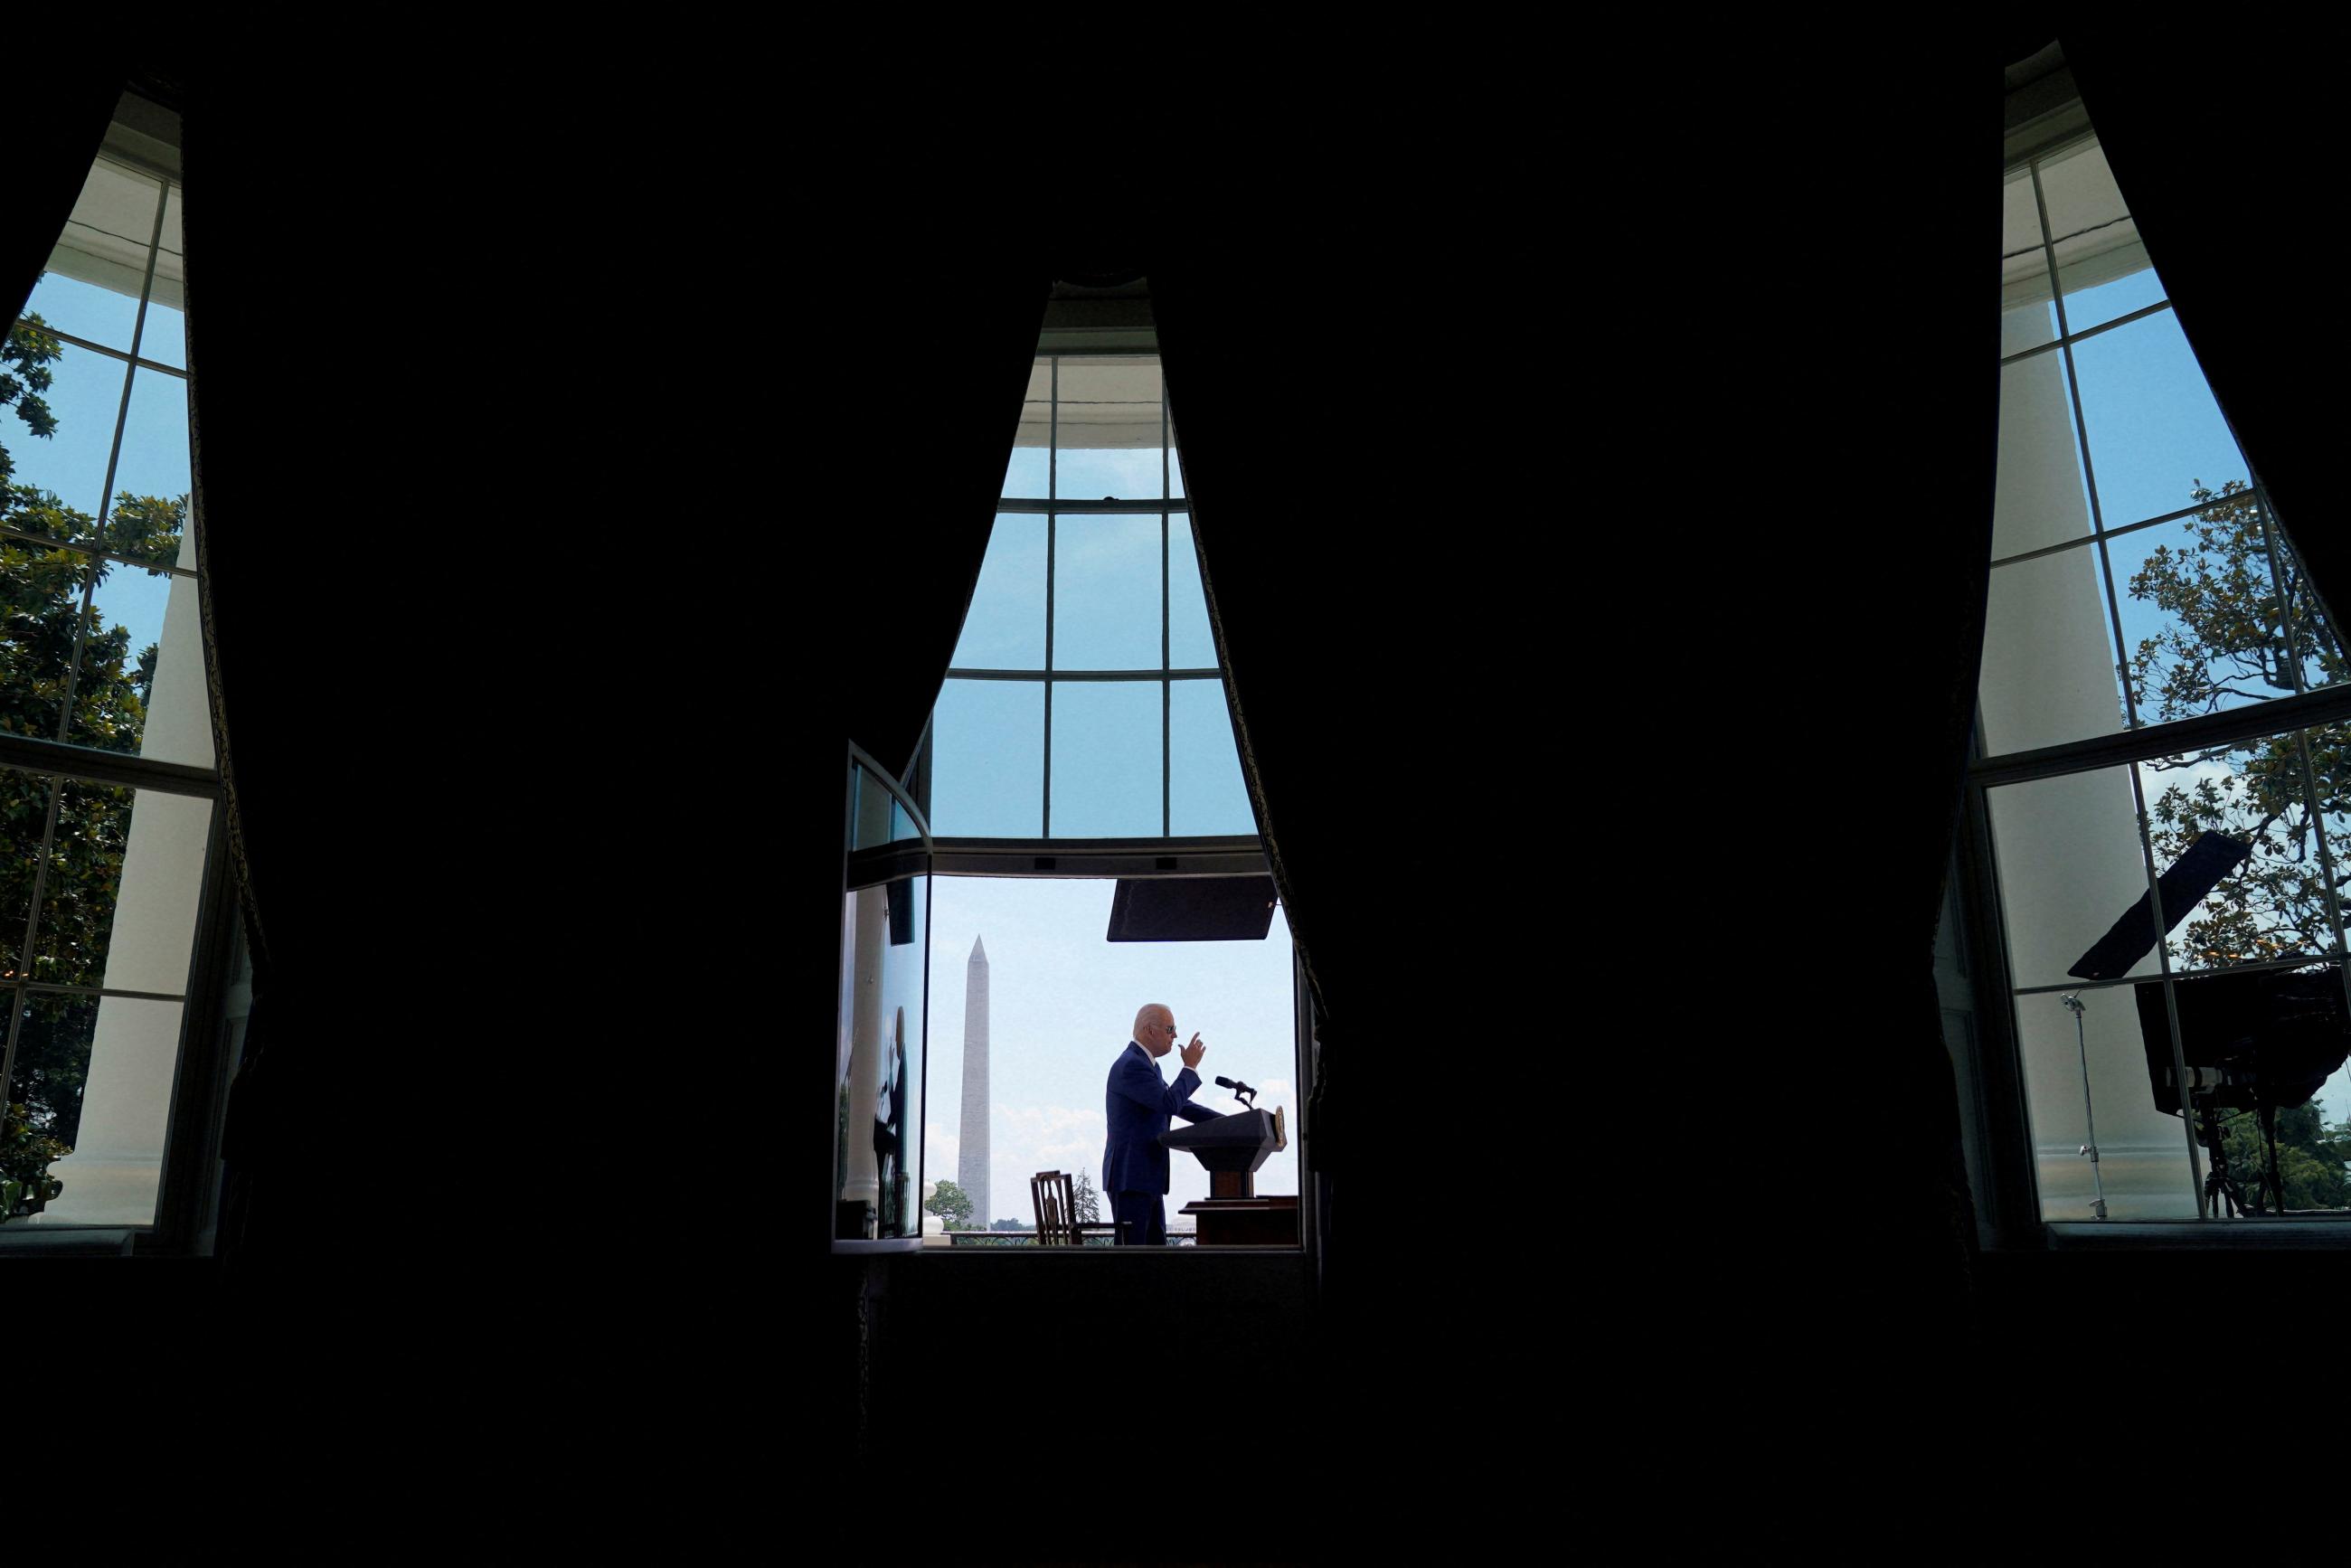 U.S. President Joe Biden is seen in silhouette through a window of the White House, with the Washington Monument in the background, as he speaks before signing two bills aimed at combating fraud in the COVID-19 small business relief programs at the White House in Washington, DC, on August 5, 2022. 